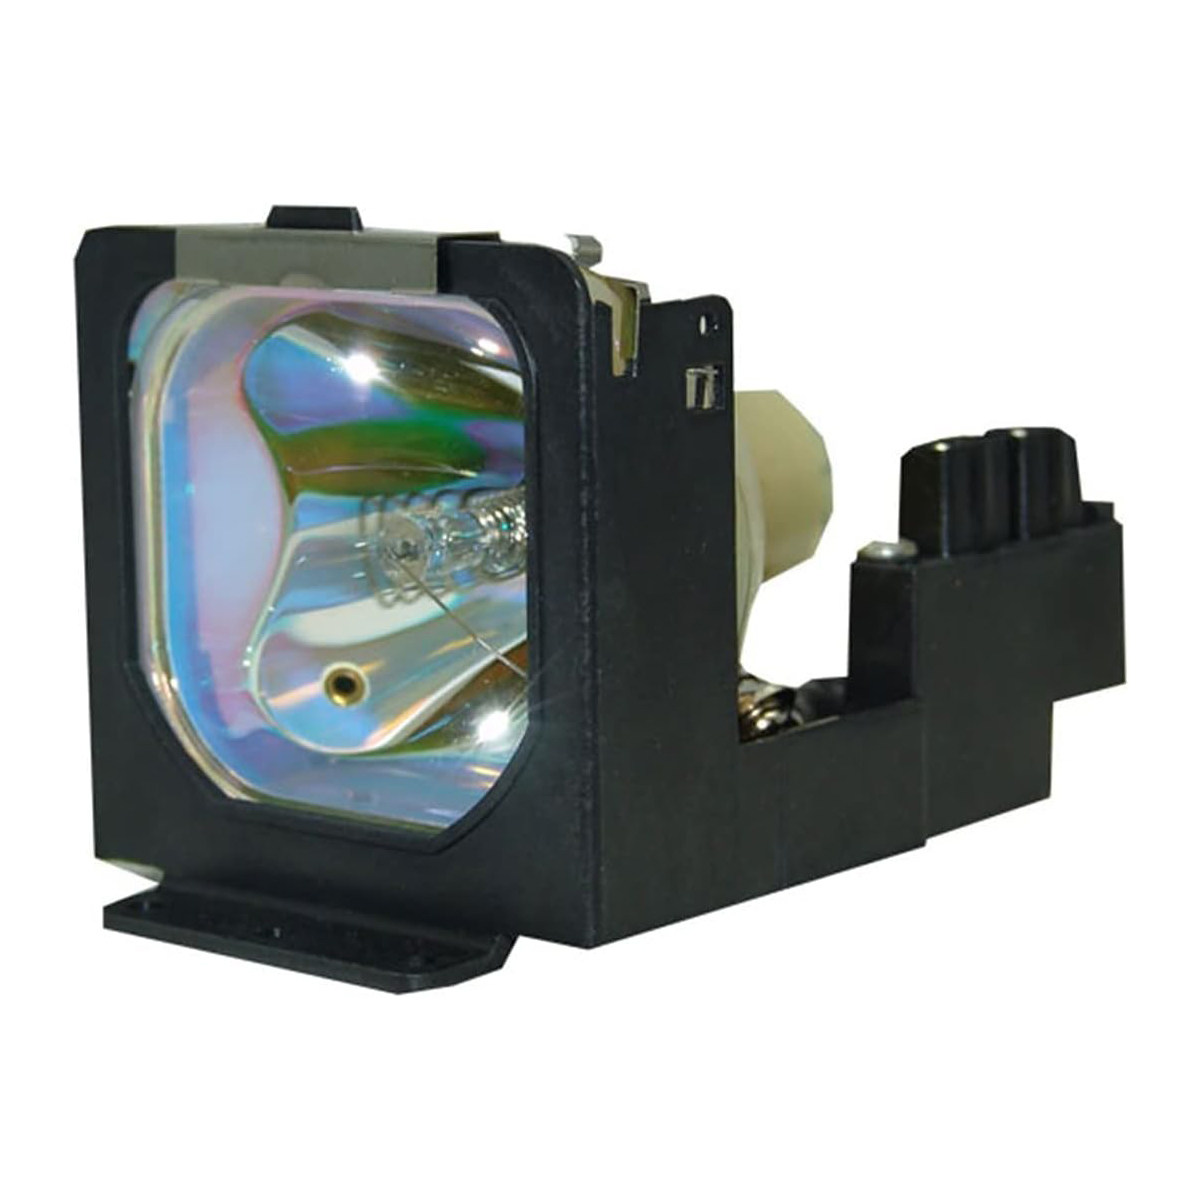 Replacement Projector lamp POA-LMP23 For Sanyo Projector